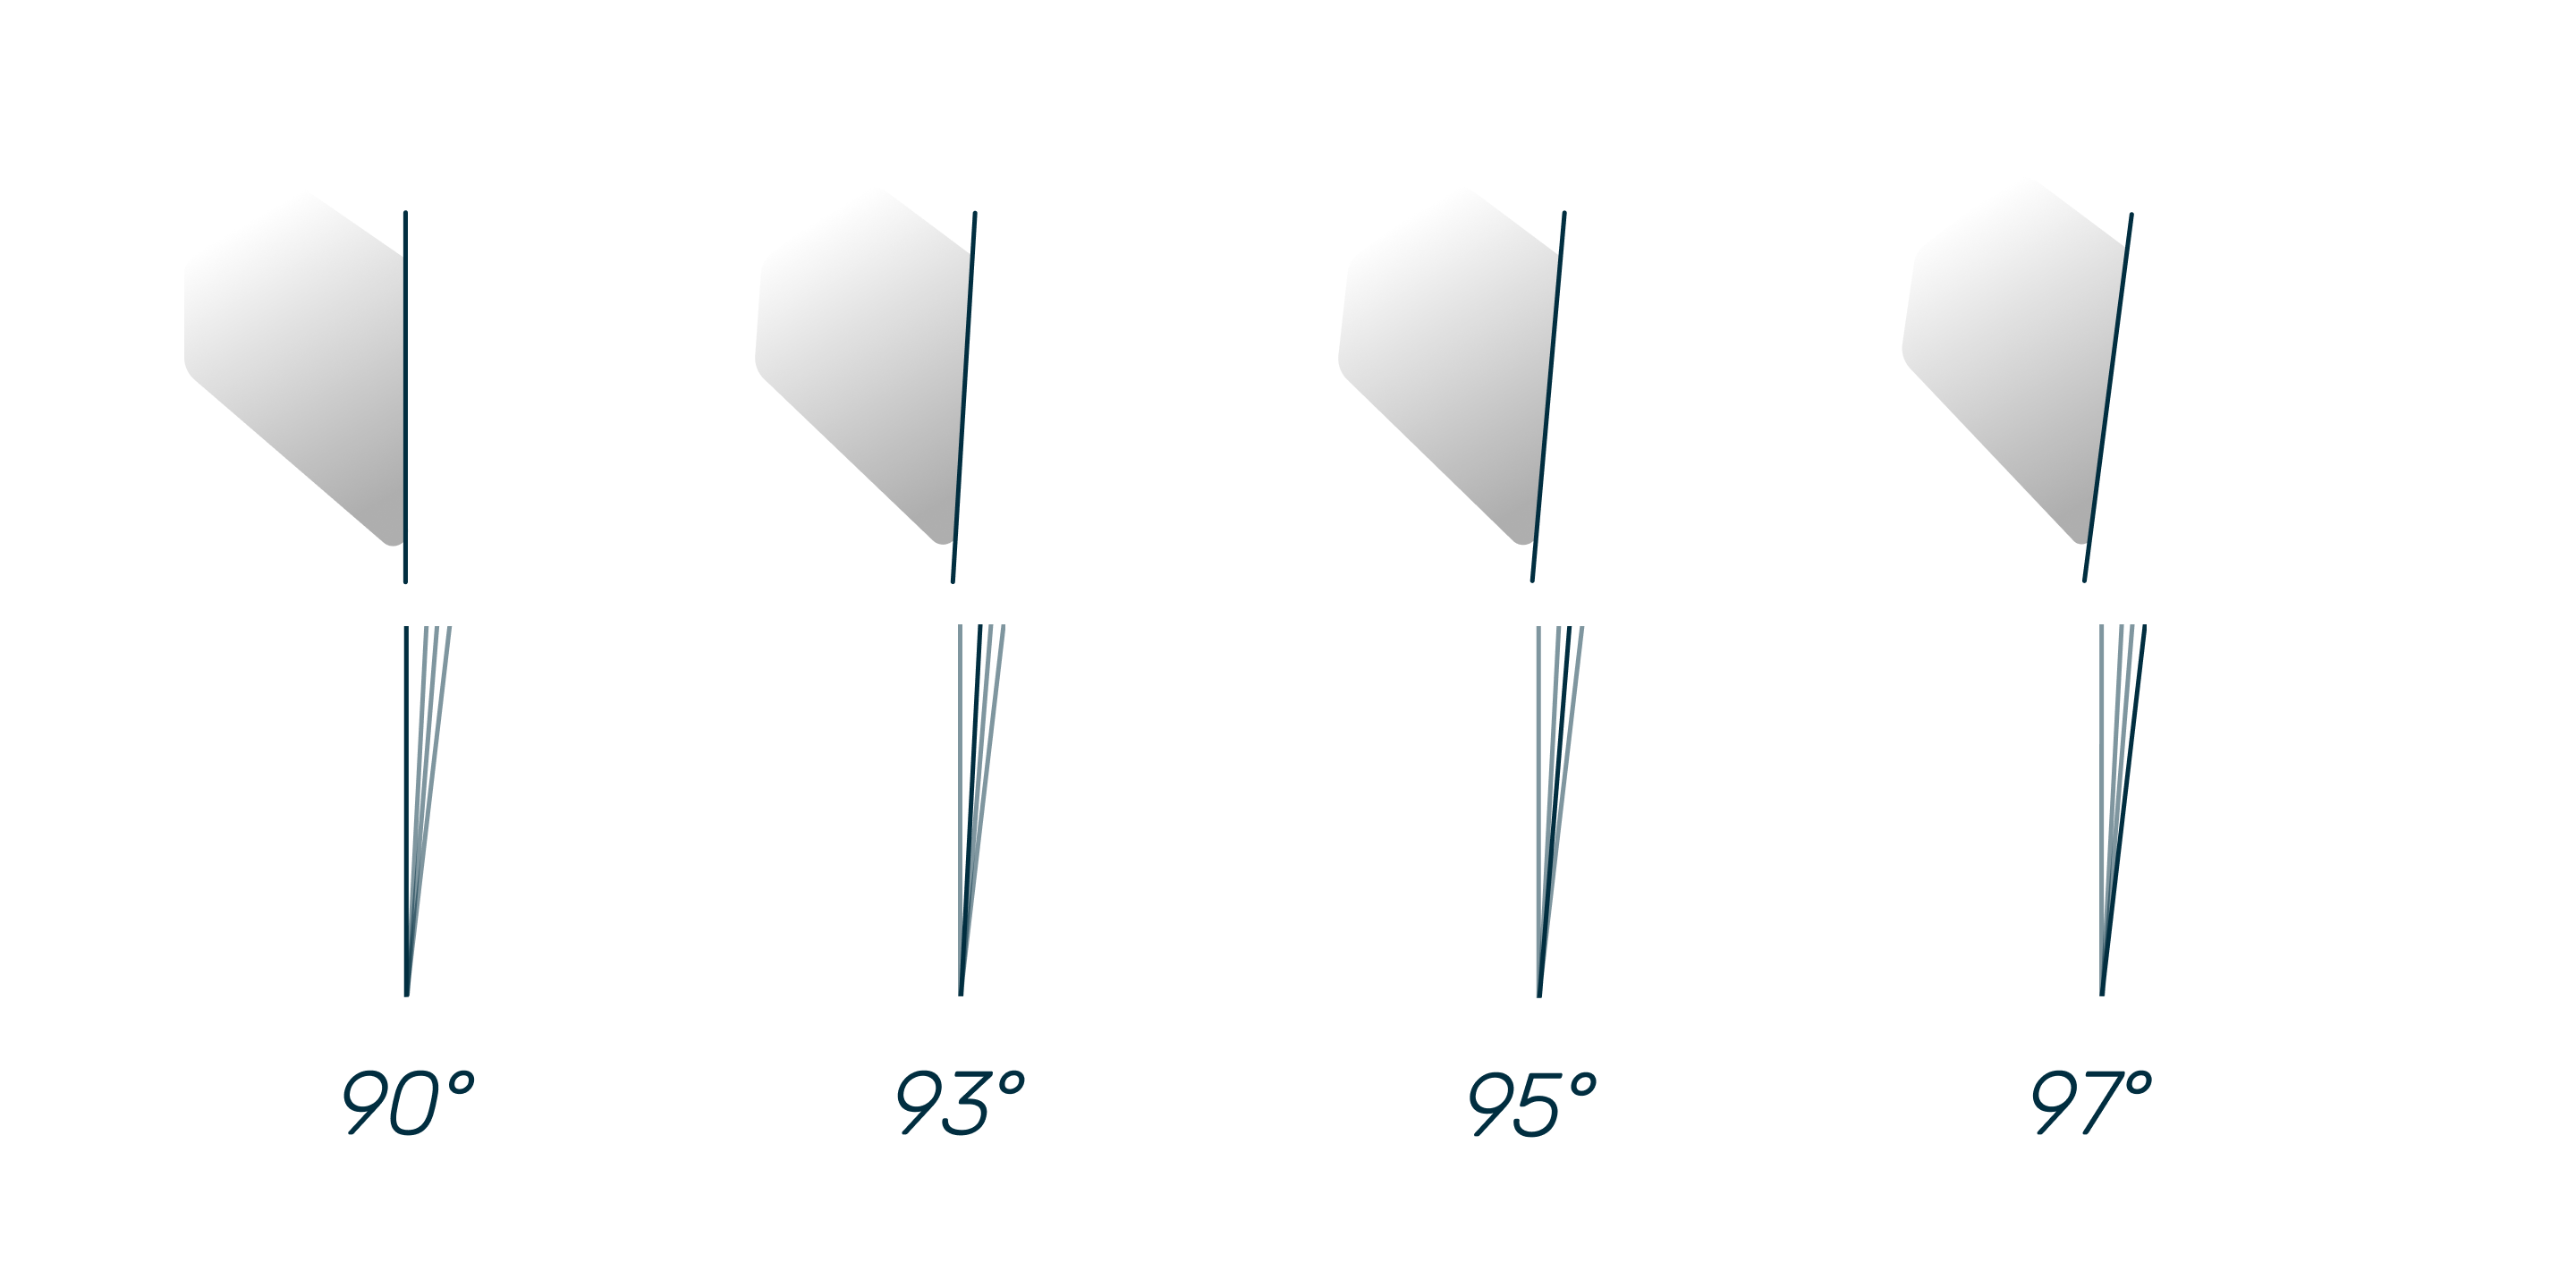 Diagram showing the different angles of the VeVe heart logo